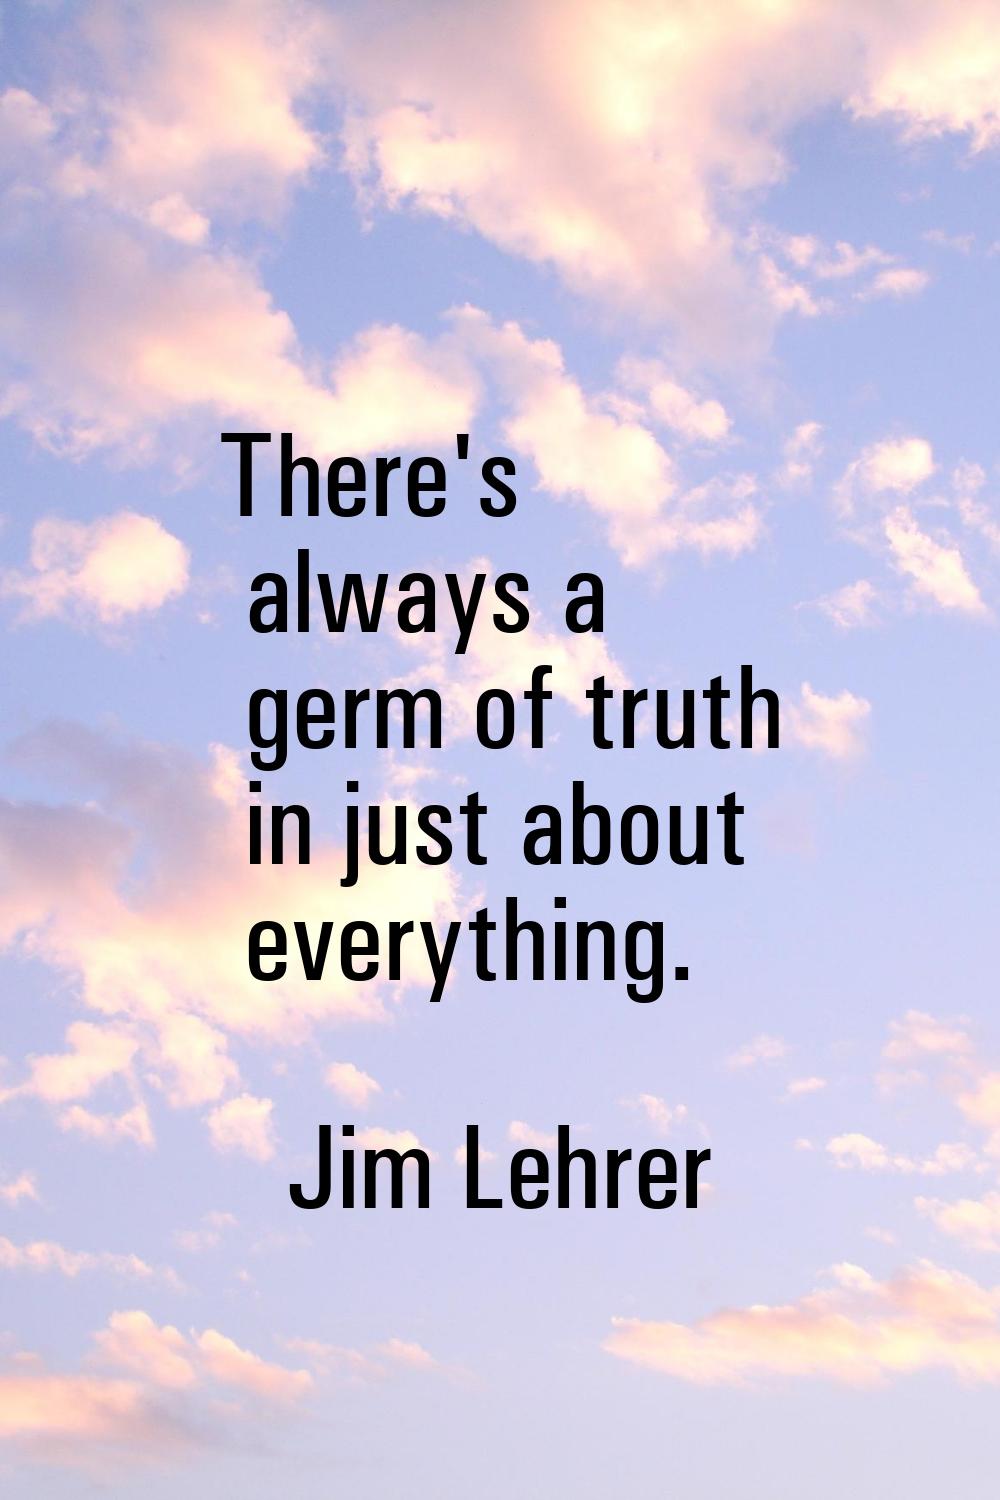 There's always a germ of truth in just about everything.